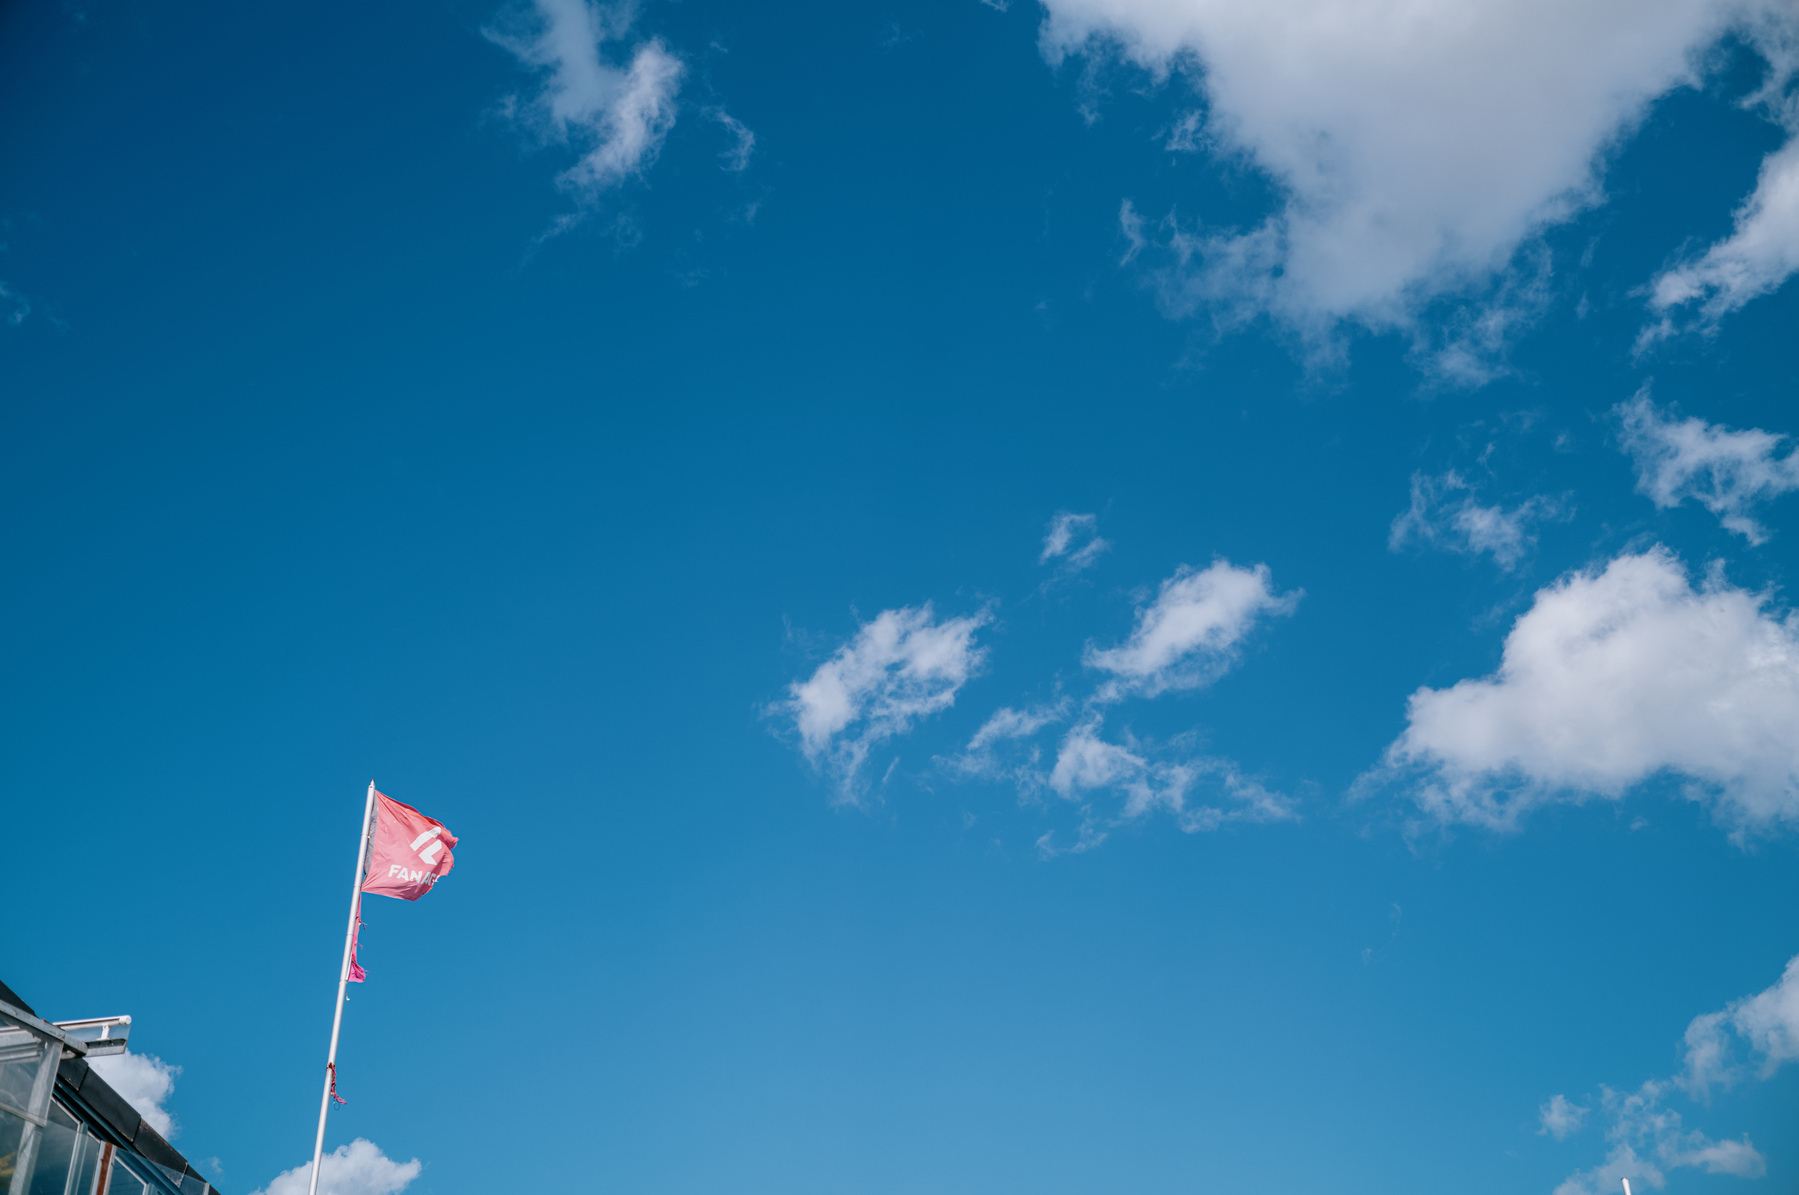 A flag is flying against a clear blue sky scattered with a few white clouds.